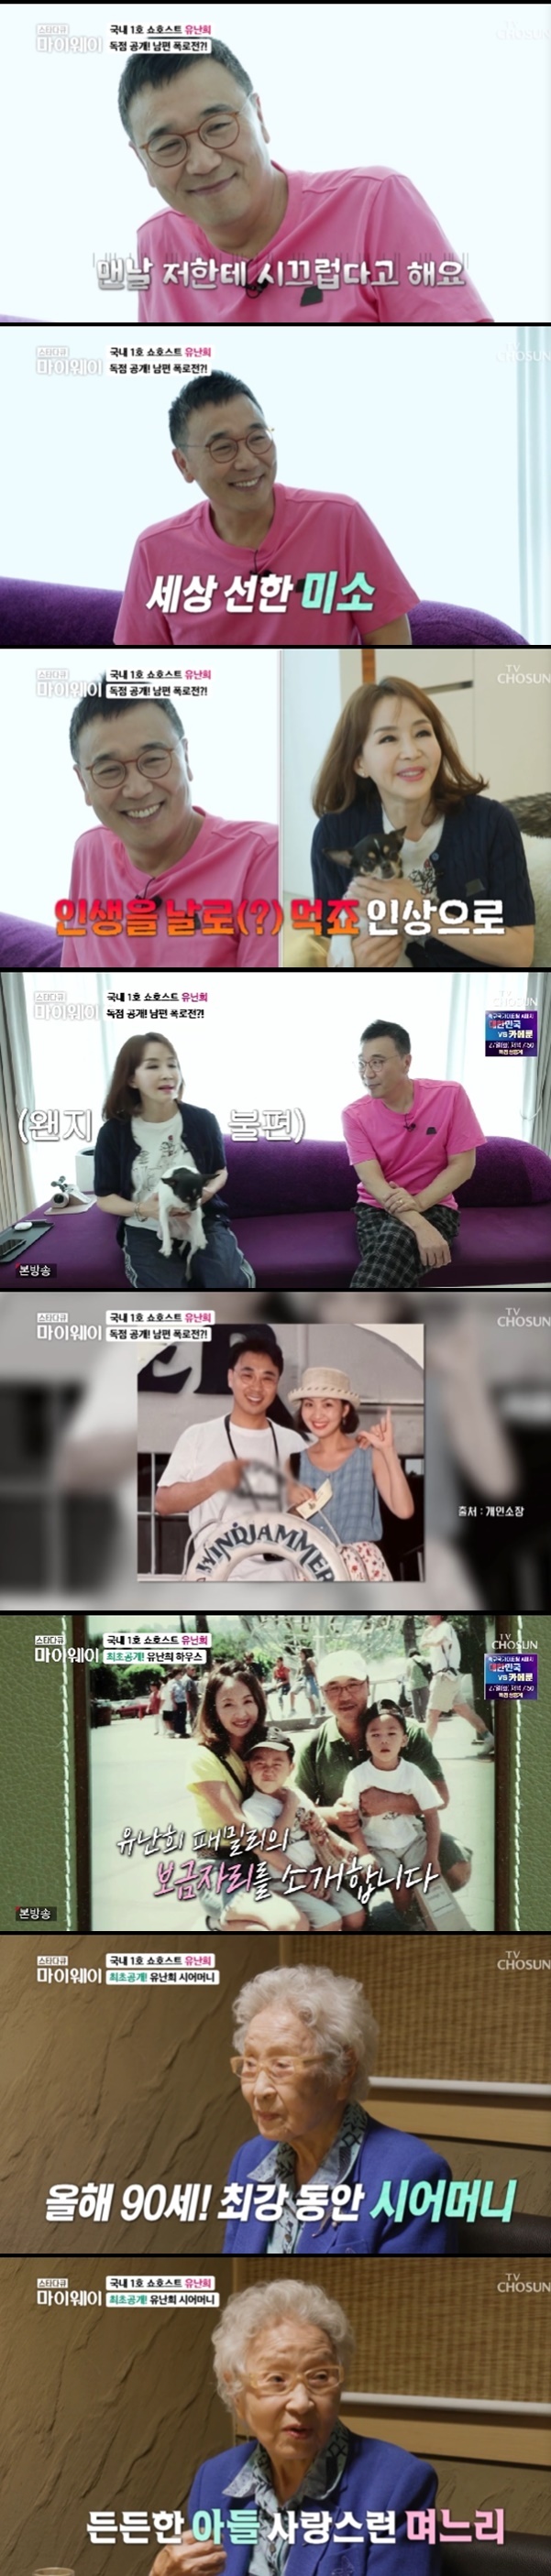 star documentary myway yu nan-hee has revealed a home with pediatrician Husband.In the TV CHOSUN star documentary myway broadcasted on the 25th, Korea s No. 1 show host Yu nan-hee appeared and released the family and house for the first time from the history of announcer 22.Yu nan-hee became the first show host in Korea in 1995 when he was the first home shopping broadcasting company in Korea.In less than a year after opening, it achieved sales of 100 million won per hour. In 2012, it exceeded 100 million sales per minute for the first time in Home Shopping, and it was the first to record 100 million Salary records.After the Freelancers declaration, he continued to open the way for the first time and won the titles of first and best.Yu nan-hee said: Its 28 years old; weve been the first home shopping broadcast in Korea and weve had 100 million sales per hour.For the first time, it became the first Freelancers to broadcast and for the first time, it sold 100 million won per minute. Yu nan-hee met singer Noh Sa-yeon, comedian Lee Seong-mi.While talking about love and marriage, Yu nan-hee said, I do not want to marry and I want to love.When Noh Sa-yeon says, You should stay away from Husband too, yu nan-hee says, Its a weekend couple but (Husband is drinking) Moy Yat comes up.The house is almost a hotel, an inn. Yu nan-hee said, I married and it was not hard, actually. I lived in my in-laws. My in-laws were awkward, but it was so hard to live with my mother-in-law.It was from the time we raised our son that we understood her mother-in-law, who was so good at her that she said she was mama-bo in her own mouth.I did not understand it, but I lived for more than 20 years and gave birth and raised a son. I understood that my mother was very passionate about her child.On this day, Yu nan-hee unveiled a large house.Marble passage south-facing mining showed a living room with a sophisticated interior and a purple sofa.The Kitchen, which added vitality to bold colors, colorful chandelier lighting, a balance of cool marble and warm color chairs, paintings that are points, and a study filled with books were also noticeable.Yu nan-hee met and married resident Husband at the age of thirty, saying, Its Husband who has been living with me for 28 years, introducing pediatrician Kang In-nam.One went to the army and one had two sons studying (studying abroad), he said.Moy Yat listens to that story, I eat my life with impressions, the production team said.Yu nan-hee tapped Husband, who was camera conscious, saying to distance himself as usual; I dont talk much; Husband has a lot of words, he said.Im always saying its loud to me, said Husband of yu nan-hee.Husband said, I prepare ten times what I see, I cant care about anything else, life itself is a show host, would I want to live like that?(Husband) lives as an only child on her four sisters and has never done housework before; if she is so tired, she has to rub bibimbap and eat fish.I didnt even touch the housework. I went to Canada in junior high for about a year and a half, but it was completely renovated.Ive been cooking since then and now Im good, he said.Husband made kimbap saying that yu nan-hee likes it.Later, she ate out at an eel house with her 90-year-old mother-in-law; Yu nan-hee said, 10 years is so correct that she looks young. The mother-in-law said, My son and daughter-in-law are all filial.My son is strong and my daughter-in-law is lovely. Photo: TV CHOSUN broadcast screen